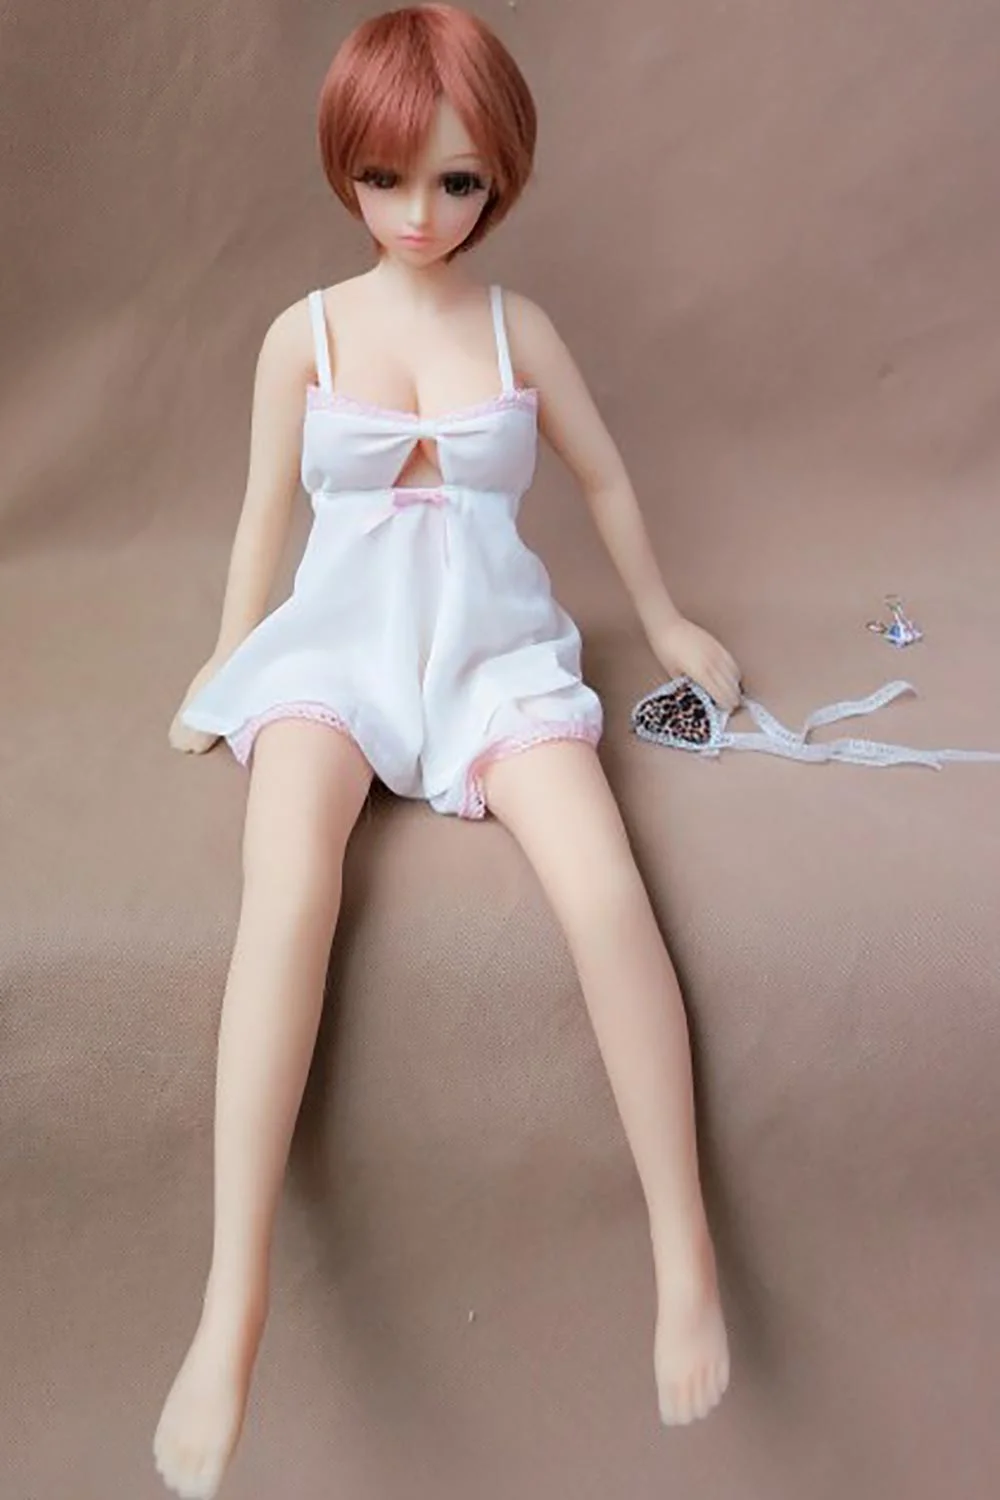 Mini sex doll with short brown hair sitting on the sofa